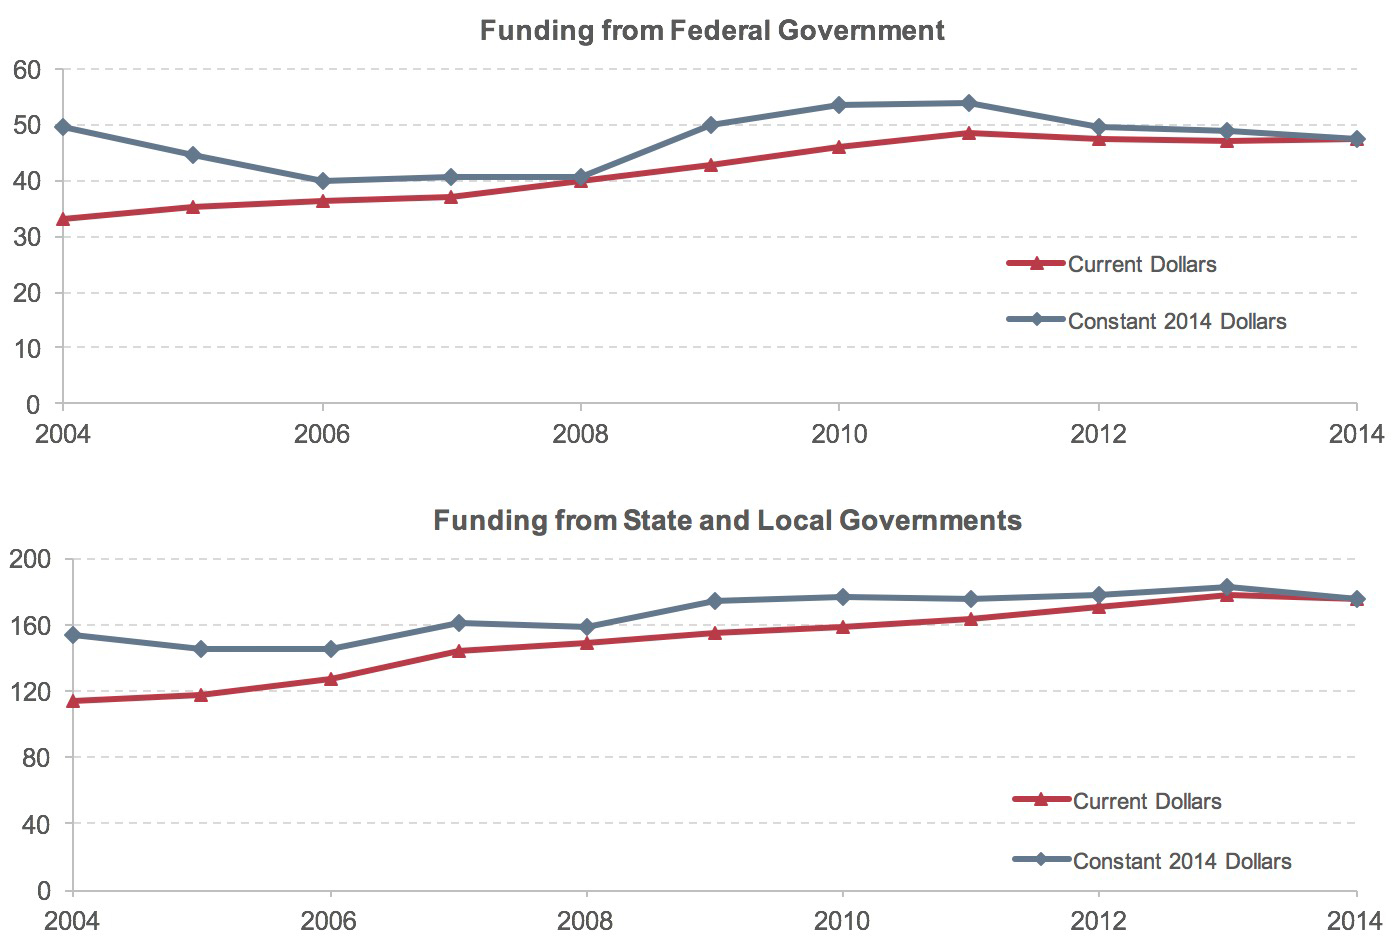 A set of two line graphs plotting values in billions of dollars for a comparison of current dollars and constant 2014 dollars in expenditures. Under funding from the Federal government, the plot of current dollars has an initial value of 33.1 billion in the year 2004, trends upward to a value of 48.6 billion for the year 2011, decreases to a final value of 47.3 billion in the year 2014. The plot of constant 2014 dollars has an initial value of 49.5 billion in the year 2004, trends downward to a value of 39.9 billion in the year 2006, increases to a value of 53.9 billion in 2011, then decreases to a final value of 47.3 billion in the year 2014. Under funding from state and local governments, the plot of current dollars has an initial value of 114.4 billion in the year 2004, then trends steadily upward to a final value of 175.3 billion in the year 2014. The plot of constant 2014 dollars has an initial value of 153.7 billion in the year 2004, decreases to a value of 145.4 billion in the year 2005, trends upward to a value of 161.5 billion in the year 2007, decreases to a value of 159.1 billion in the year 2008, trends upward to a value of 182.6 billion in the year 2013, then decreases to a value of 175.3 billion in the year 2014. Sources: Highway Statistics, various years, Tables HF-10A, HF-10, PT-1; http://www.bls.gov/cpi/.